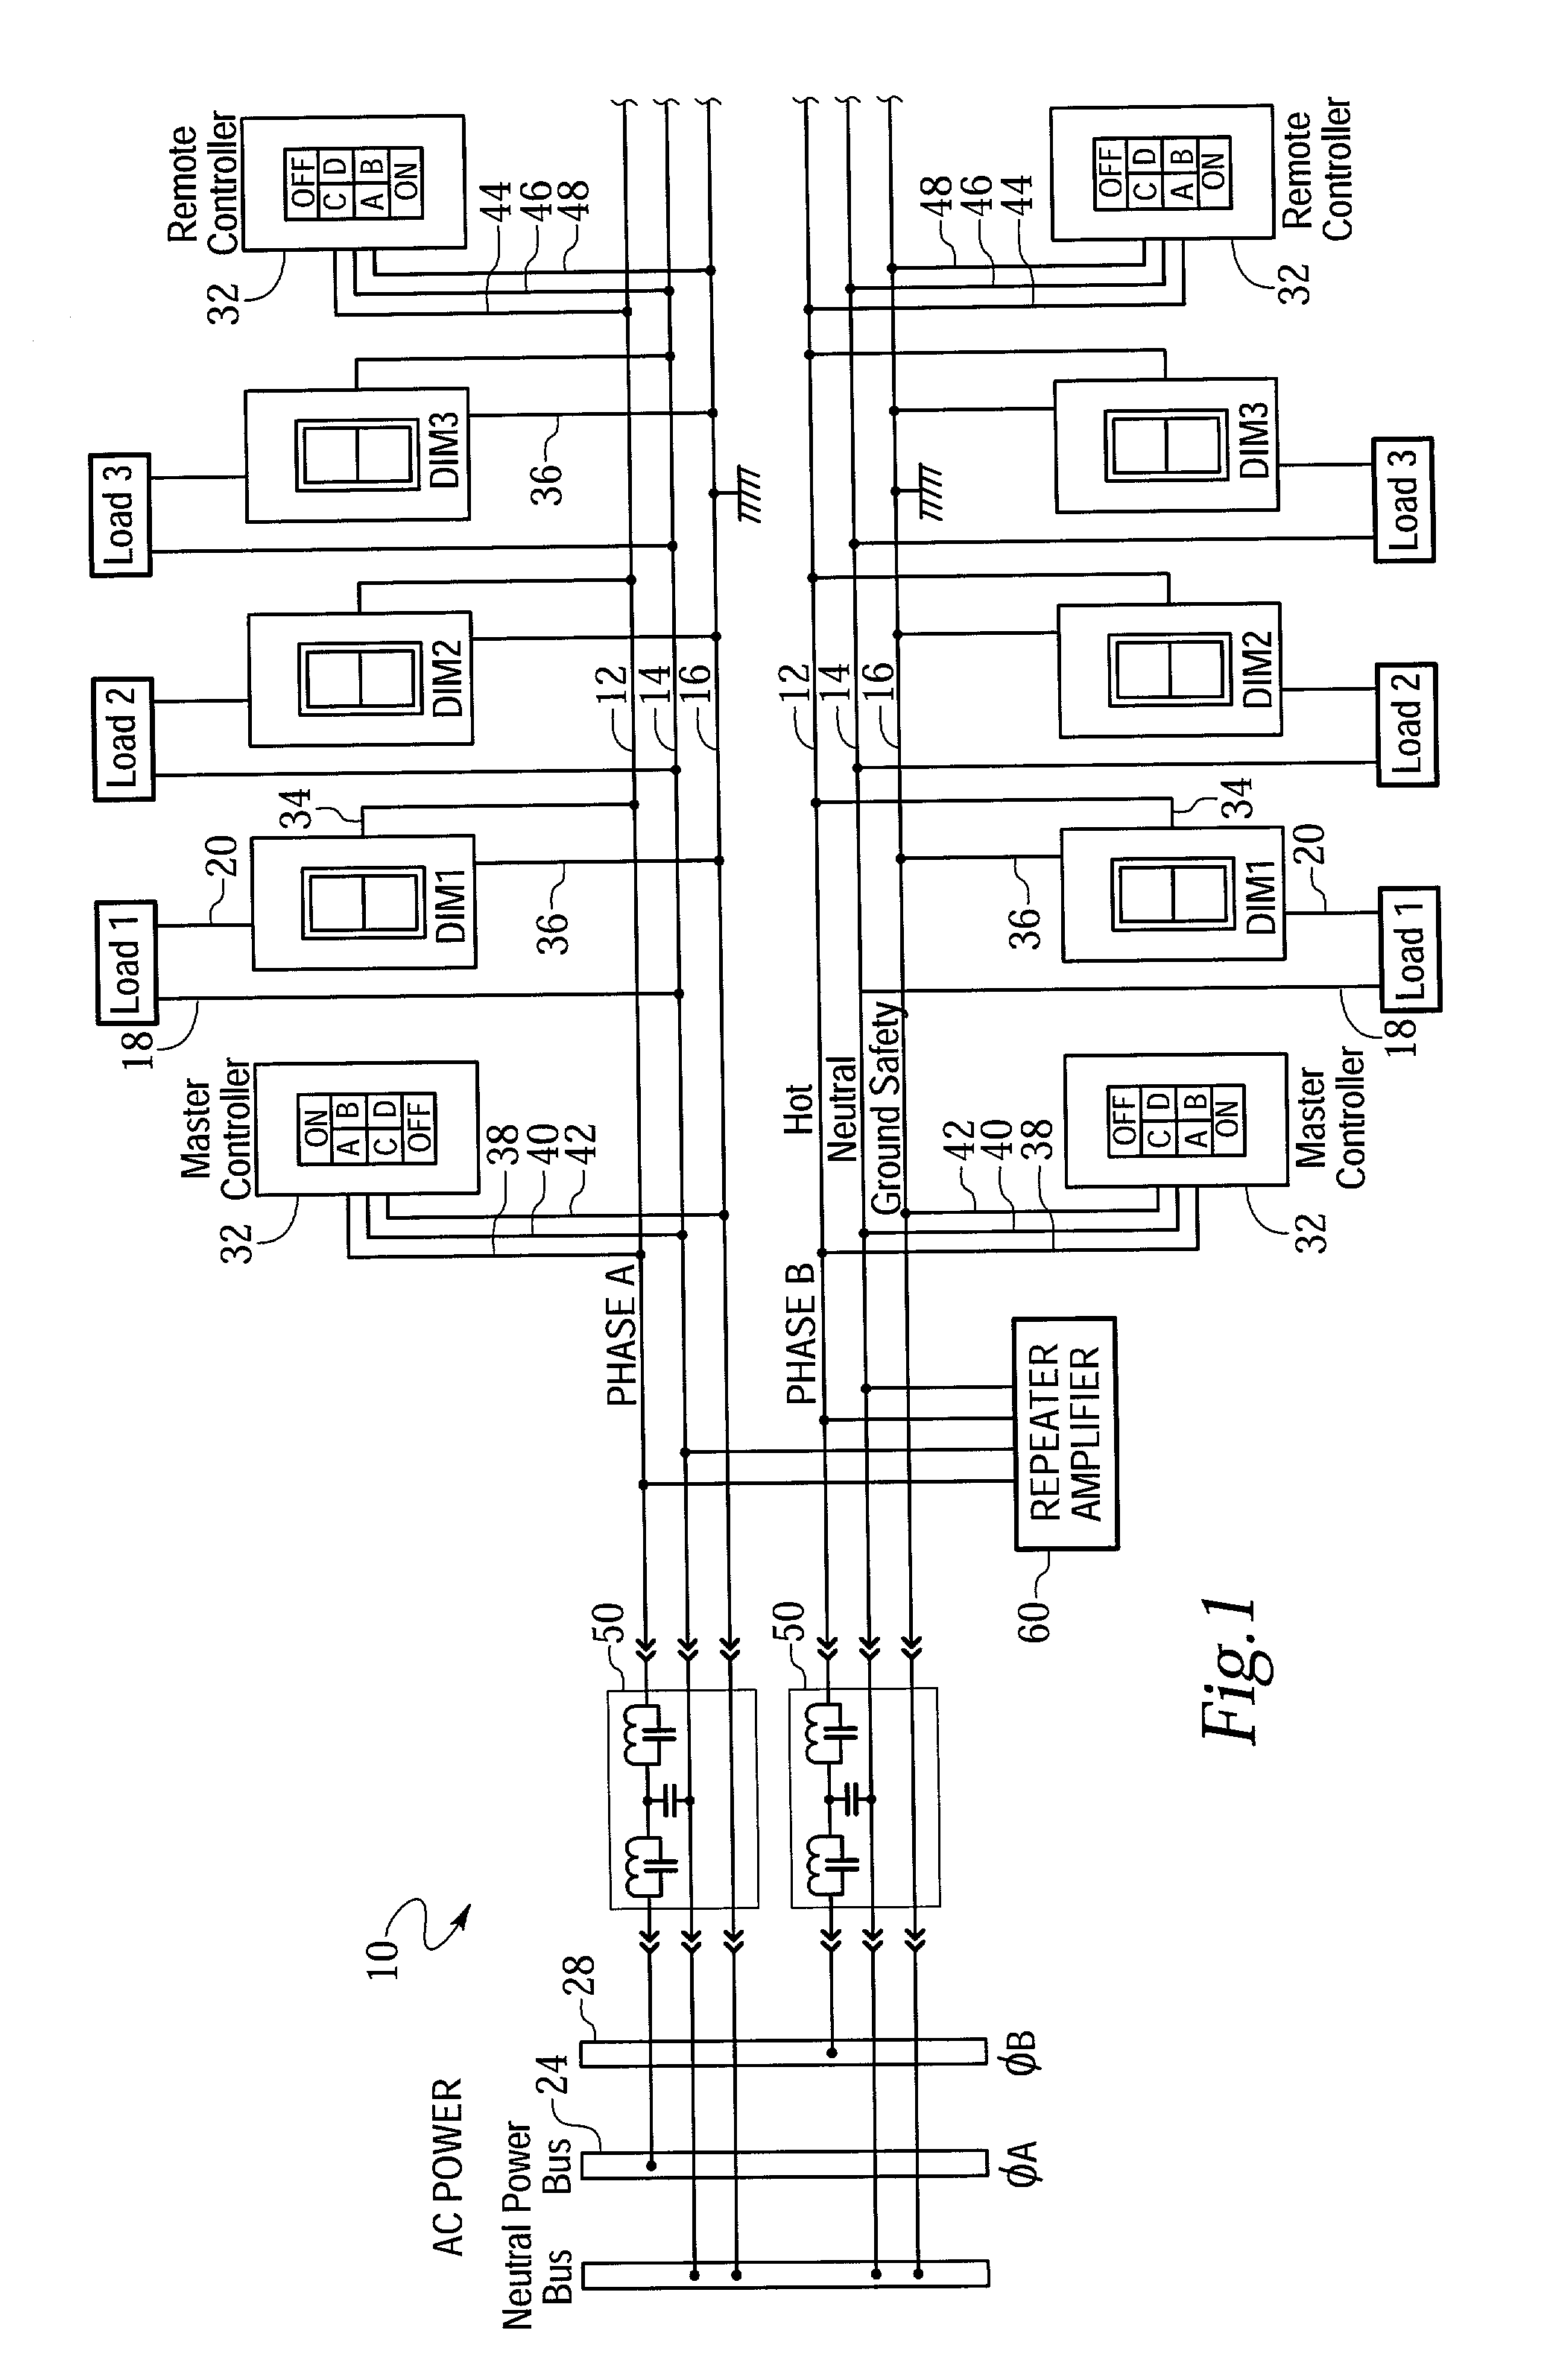 Repeater amplifier with signal firewall protection for power line carrier communication networks